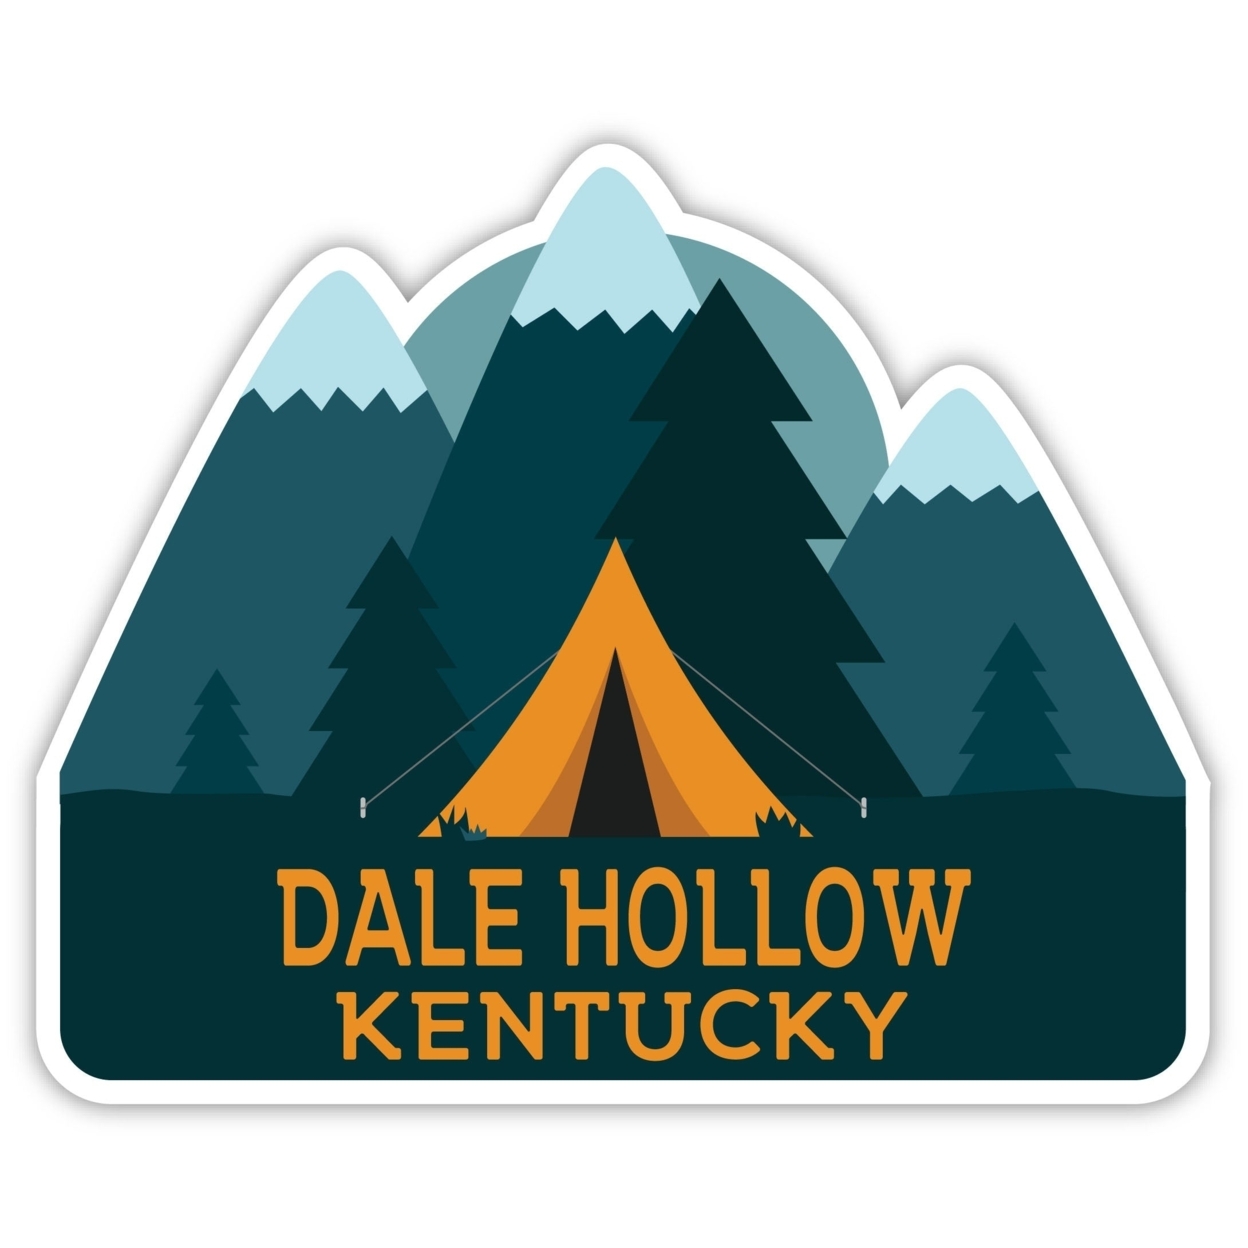 Dale Hollow Kentucky Souvenir Decorative Stickers (Choose Theme And Size) - 4-Pack, 4-Inch, Tent